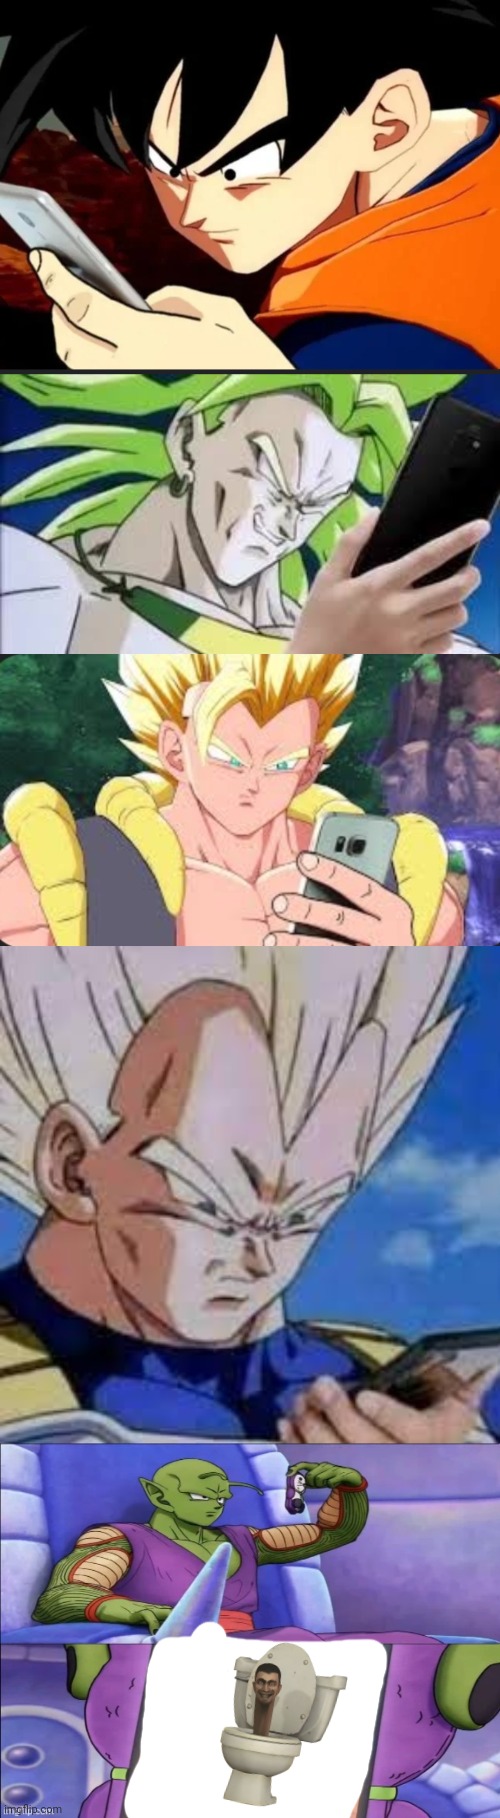 image tagged in goku sees phone and sends to piccolo,broly looking at his phone,gogeta gets message from piccolo,vegeta looking at phones | made w/ Imgflip meme maker